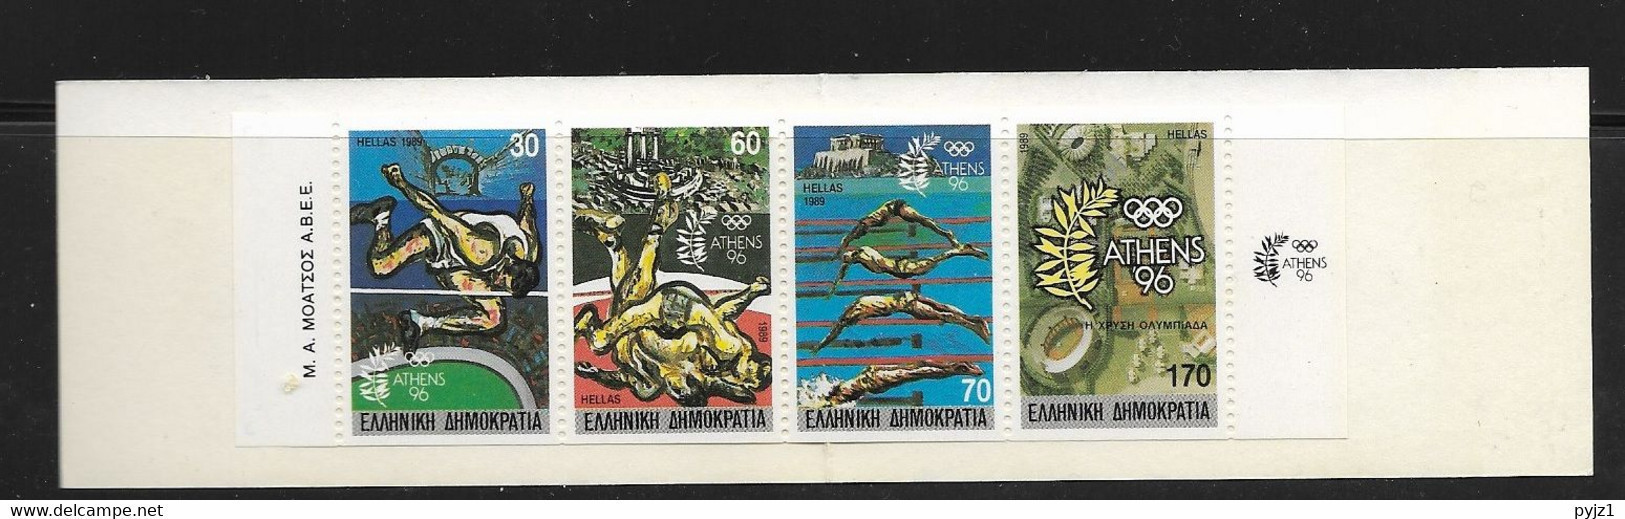 1989 MNH  Greece, Booklet Olympic Games  MH11 - Cuadernillos